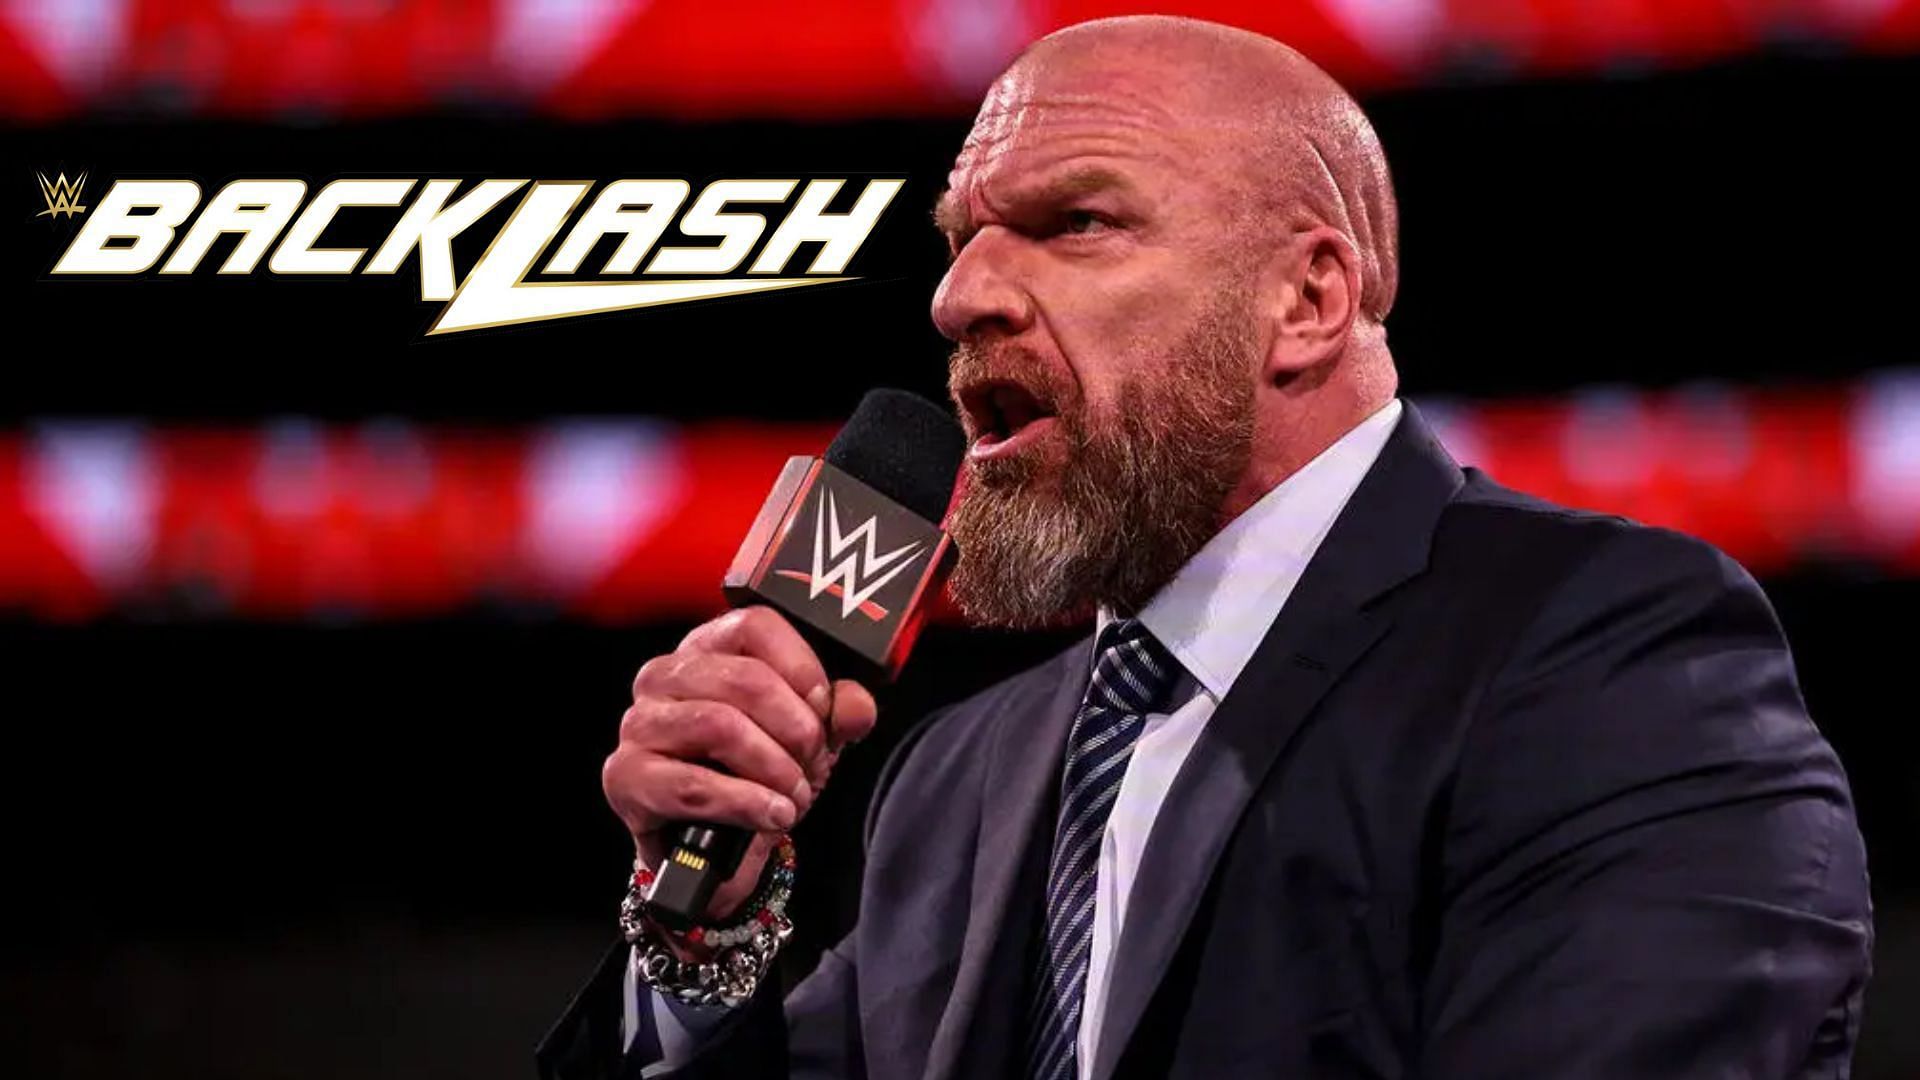 WWE Backlash 2023 was a great show.